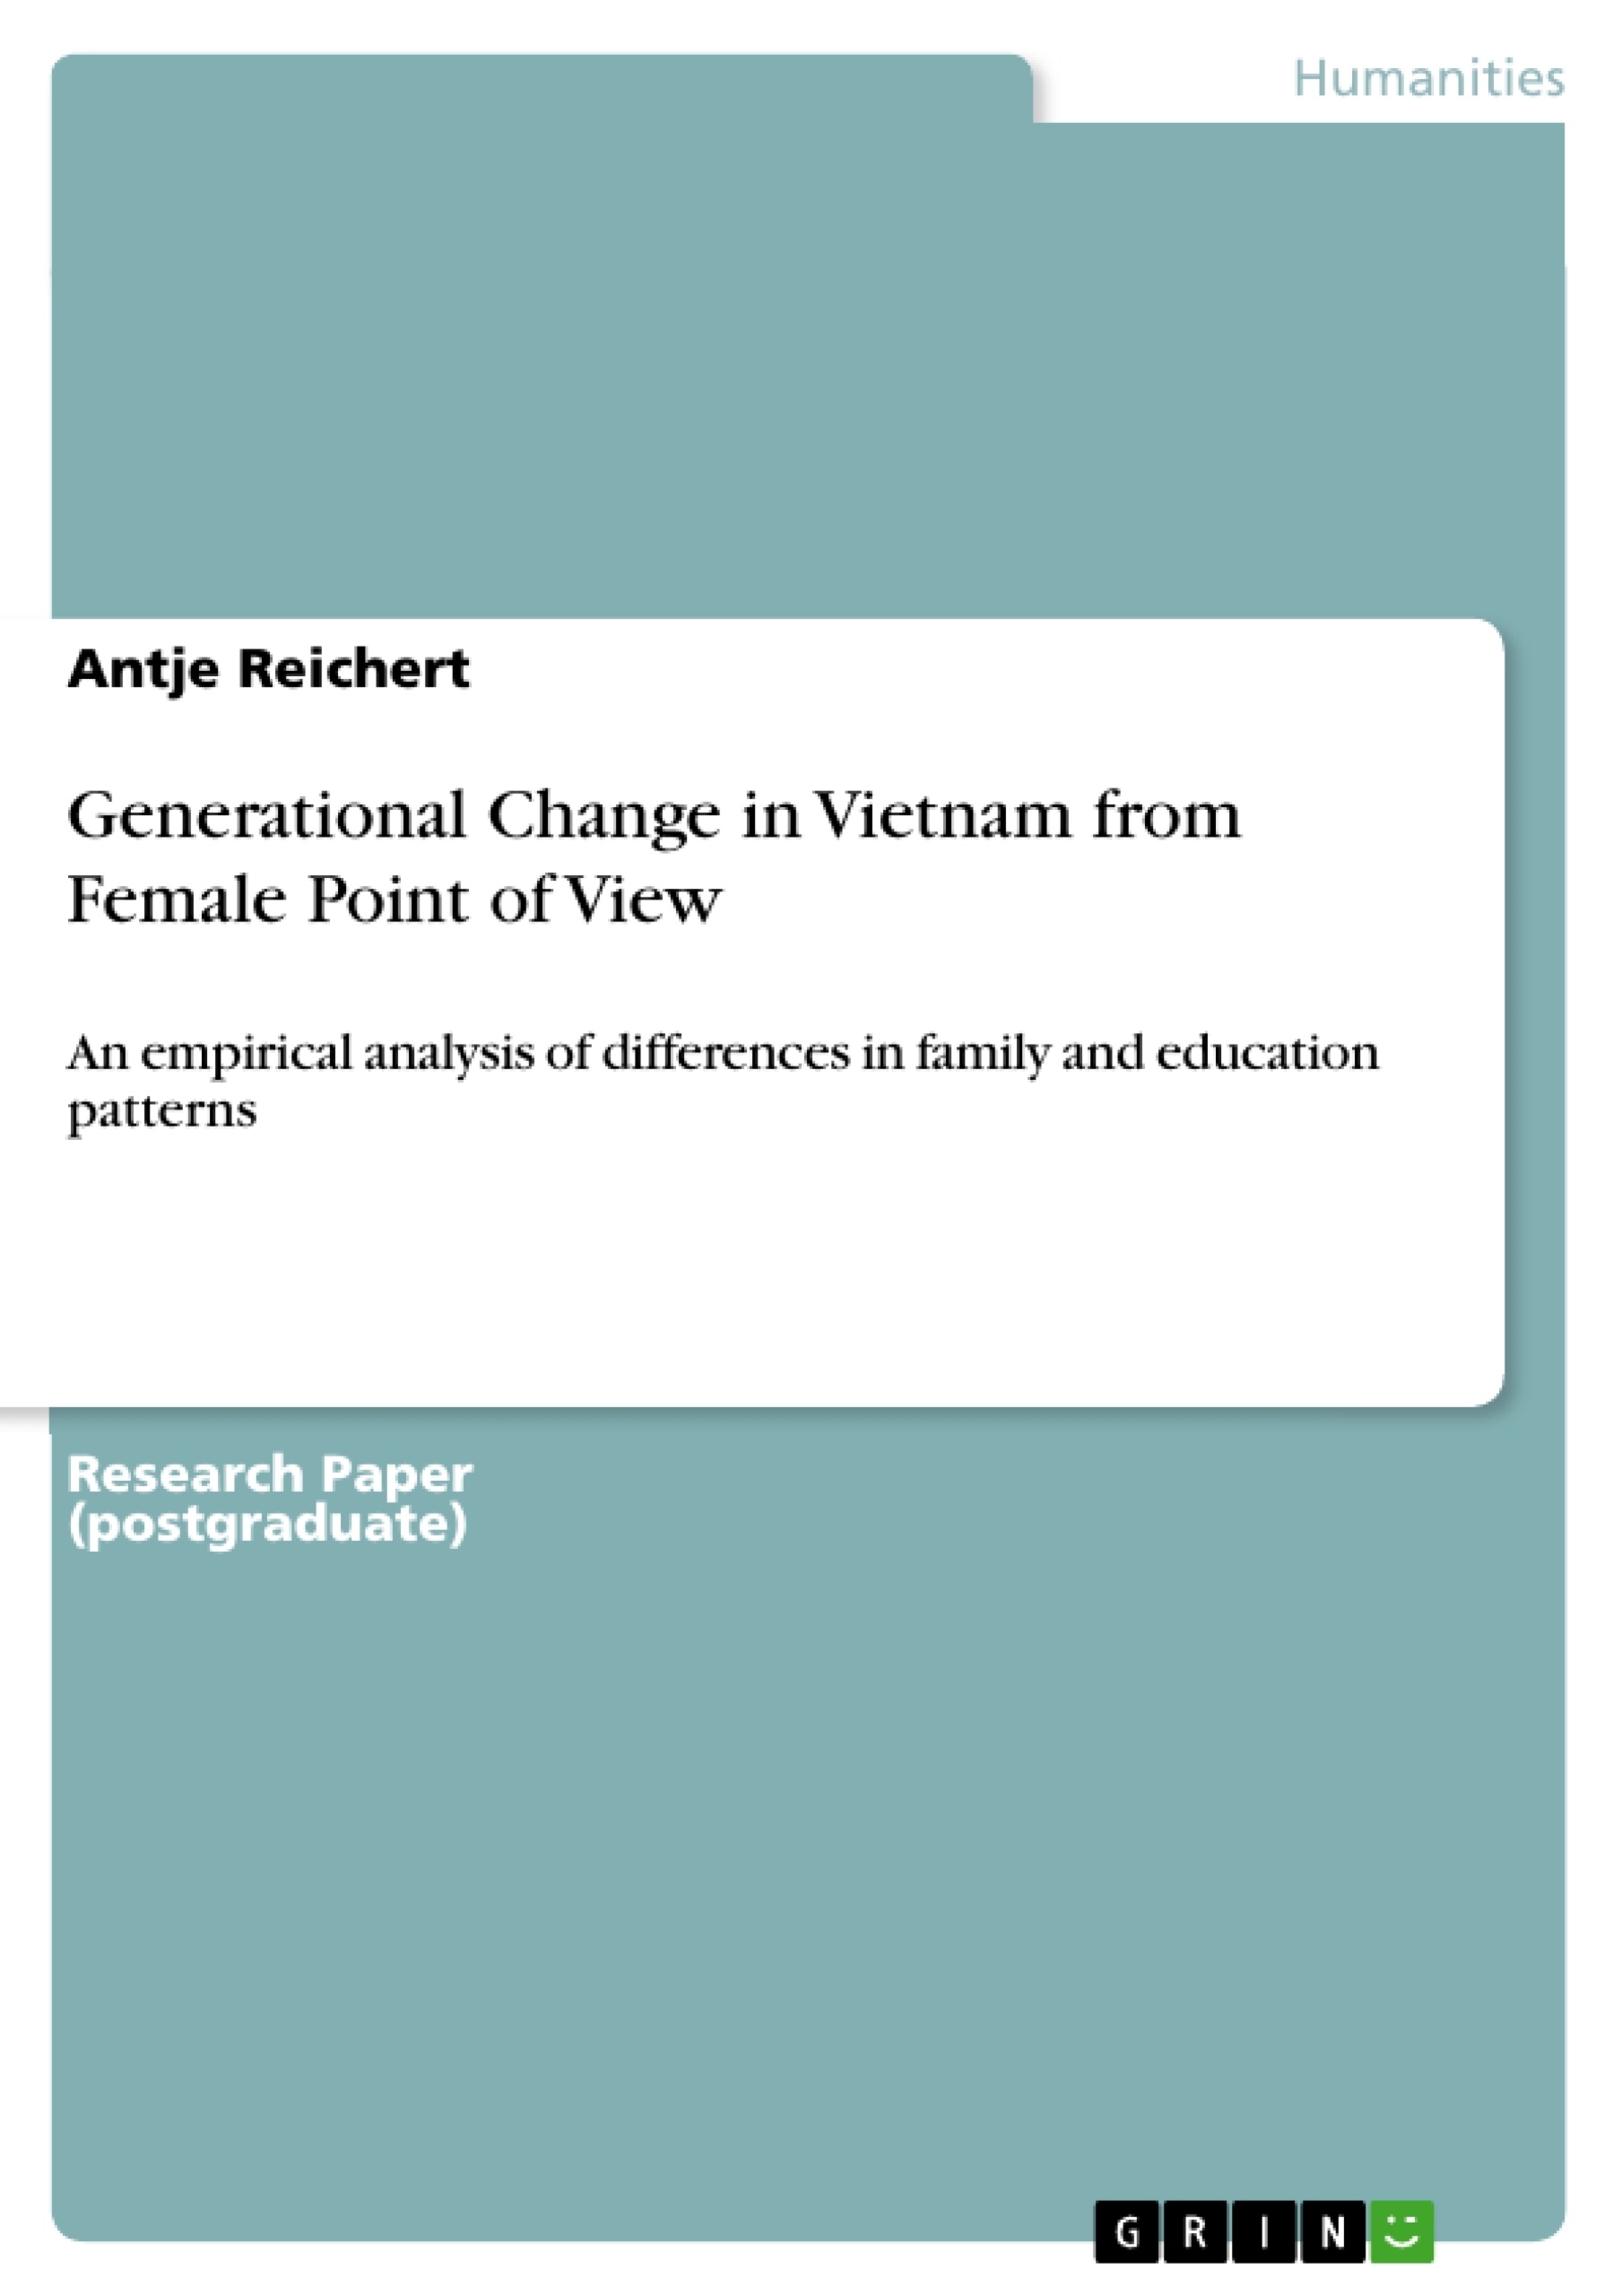 Title: Generational Change in Vietnam from Female Point of View